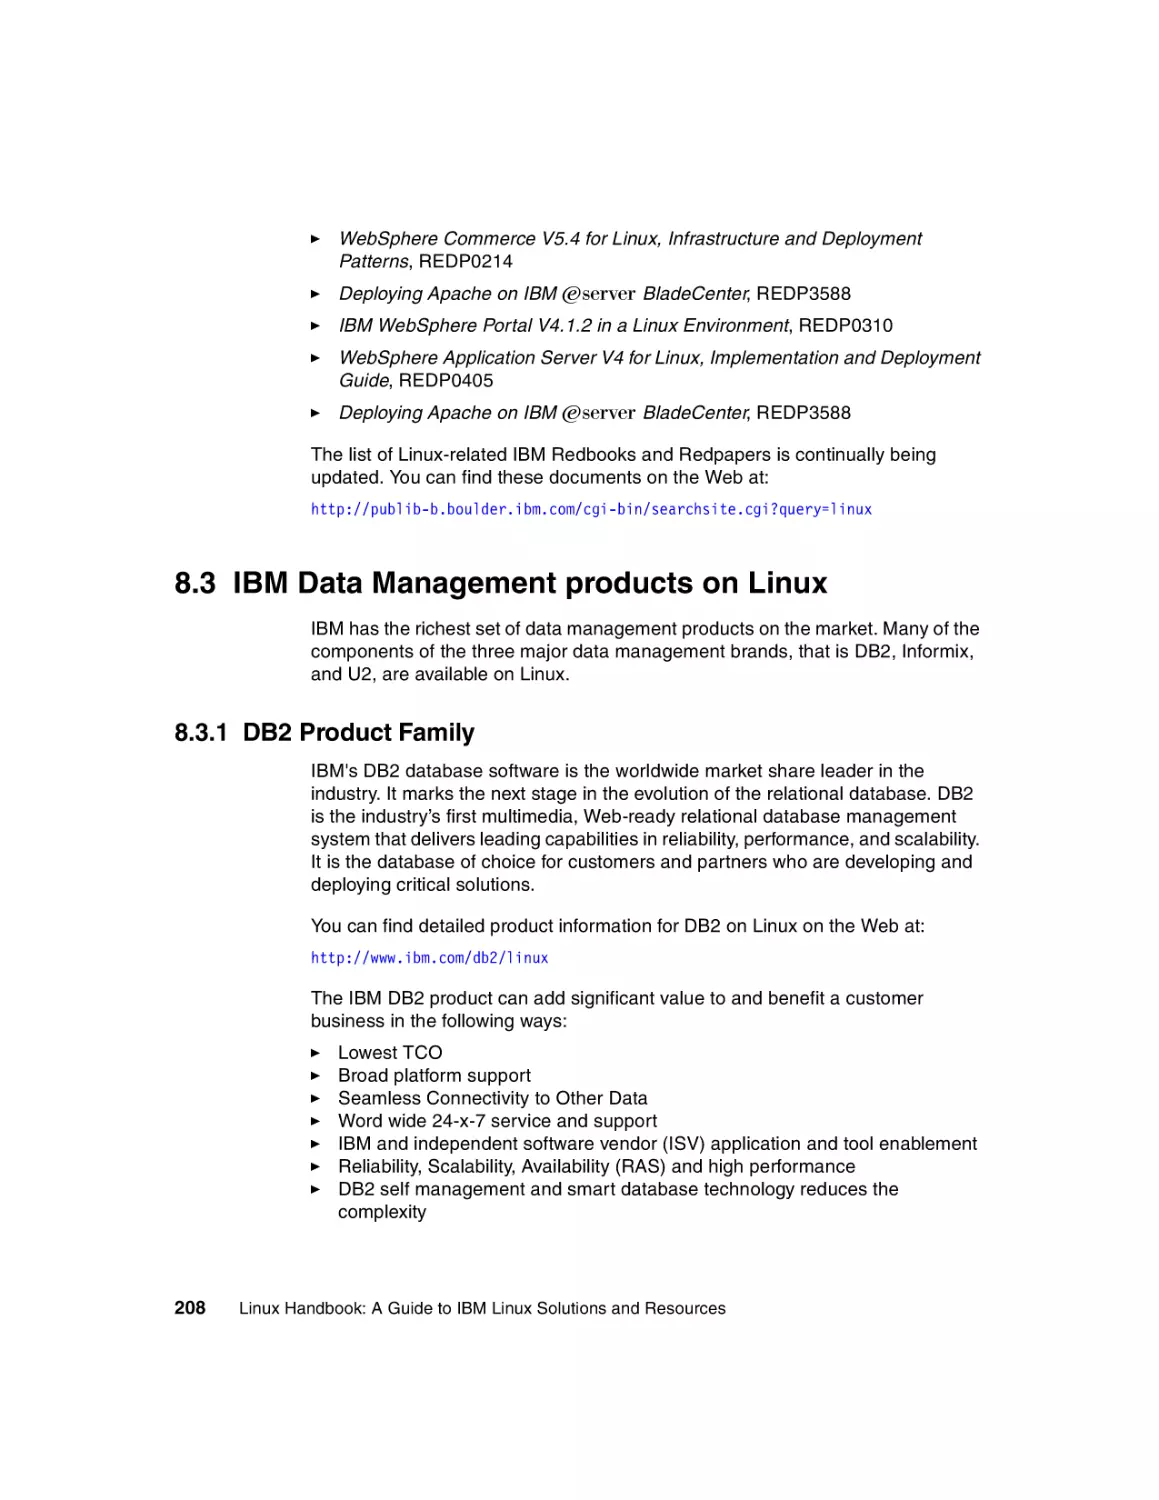 8.3 IBM Data Management products on Linux
8.3.1 DB2 Product Family